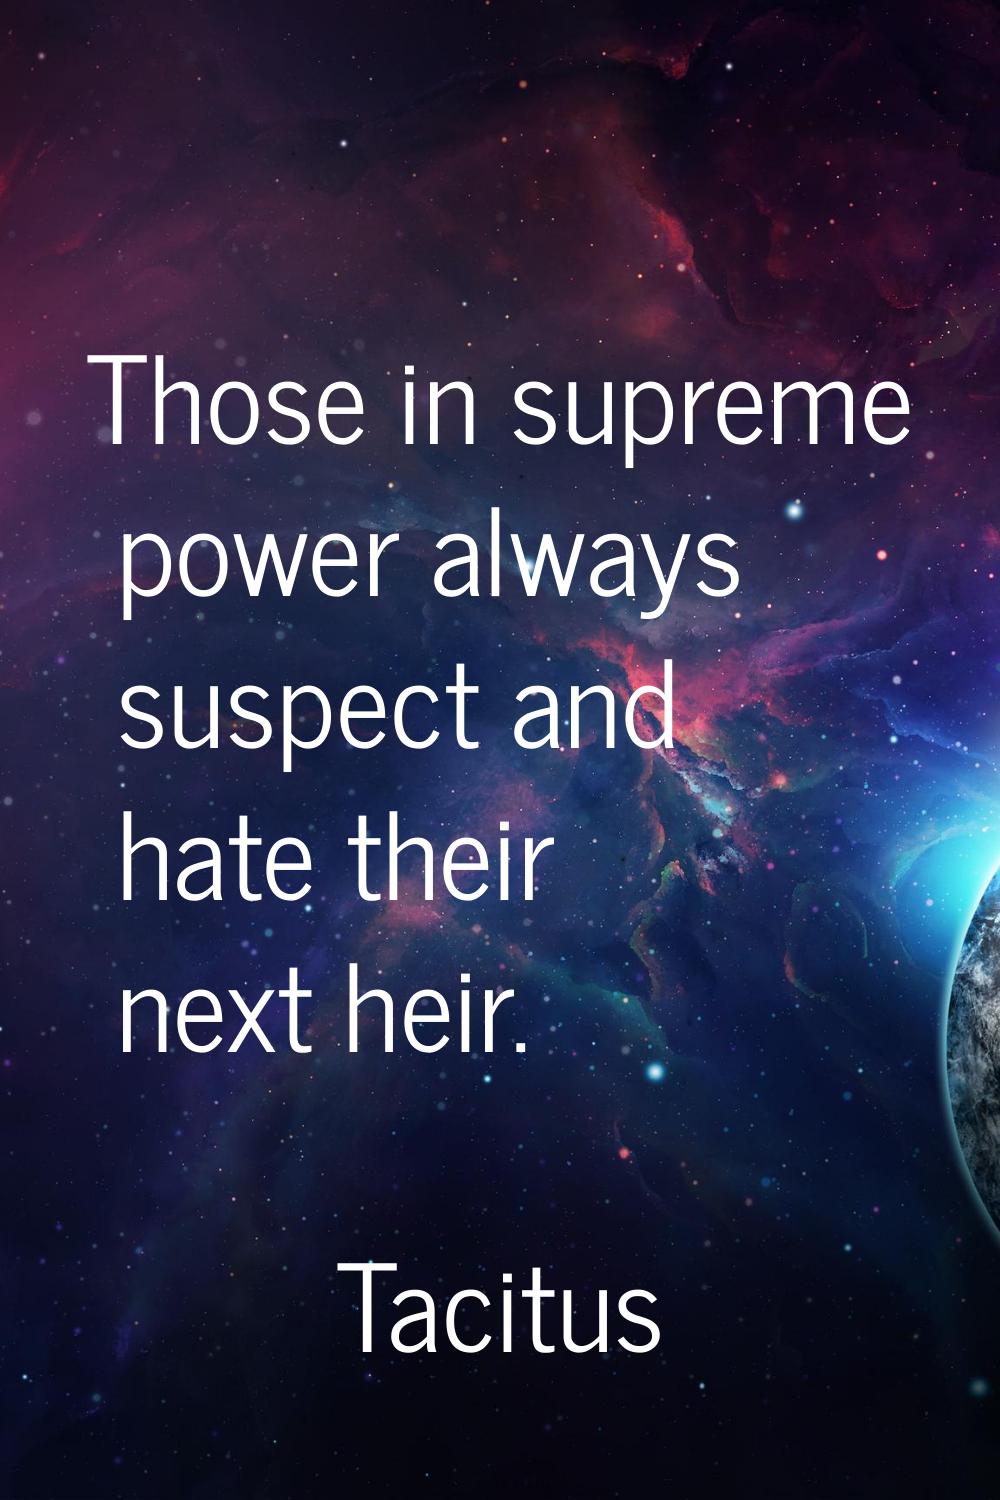 Those in supreme power always suspect and hate their next heir.